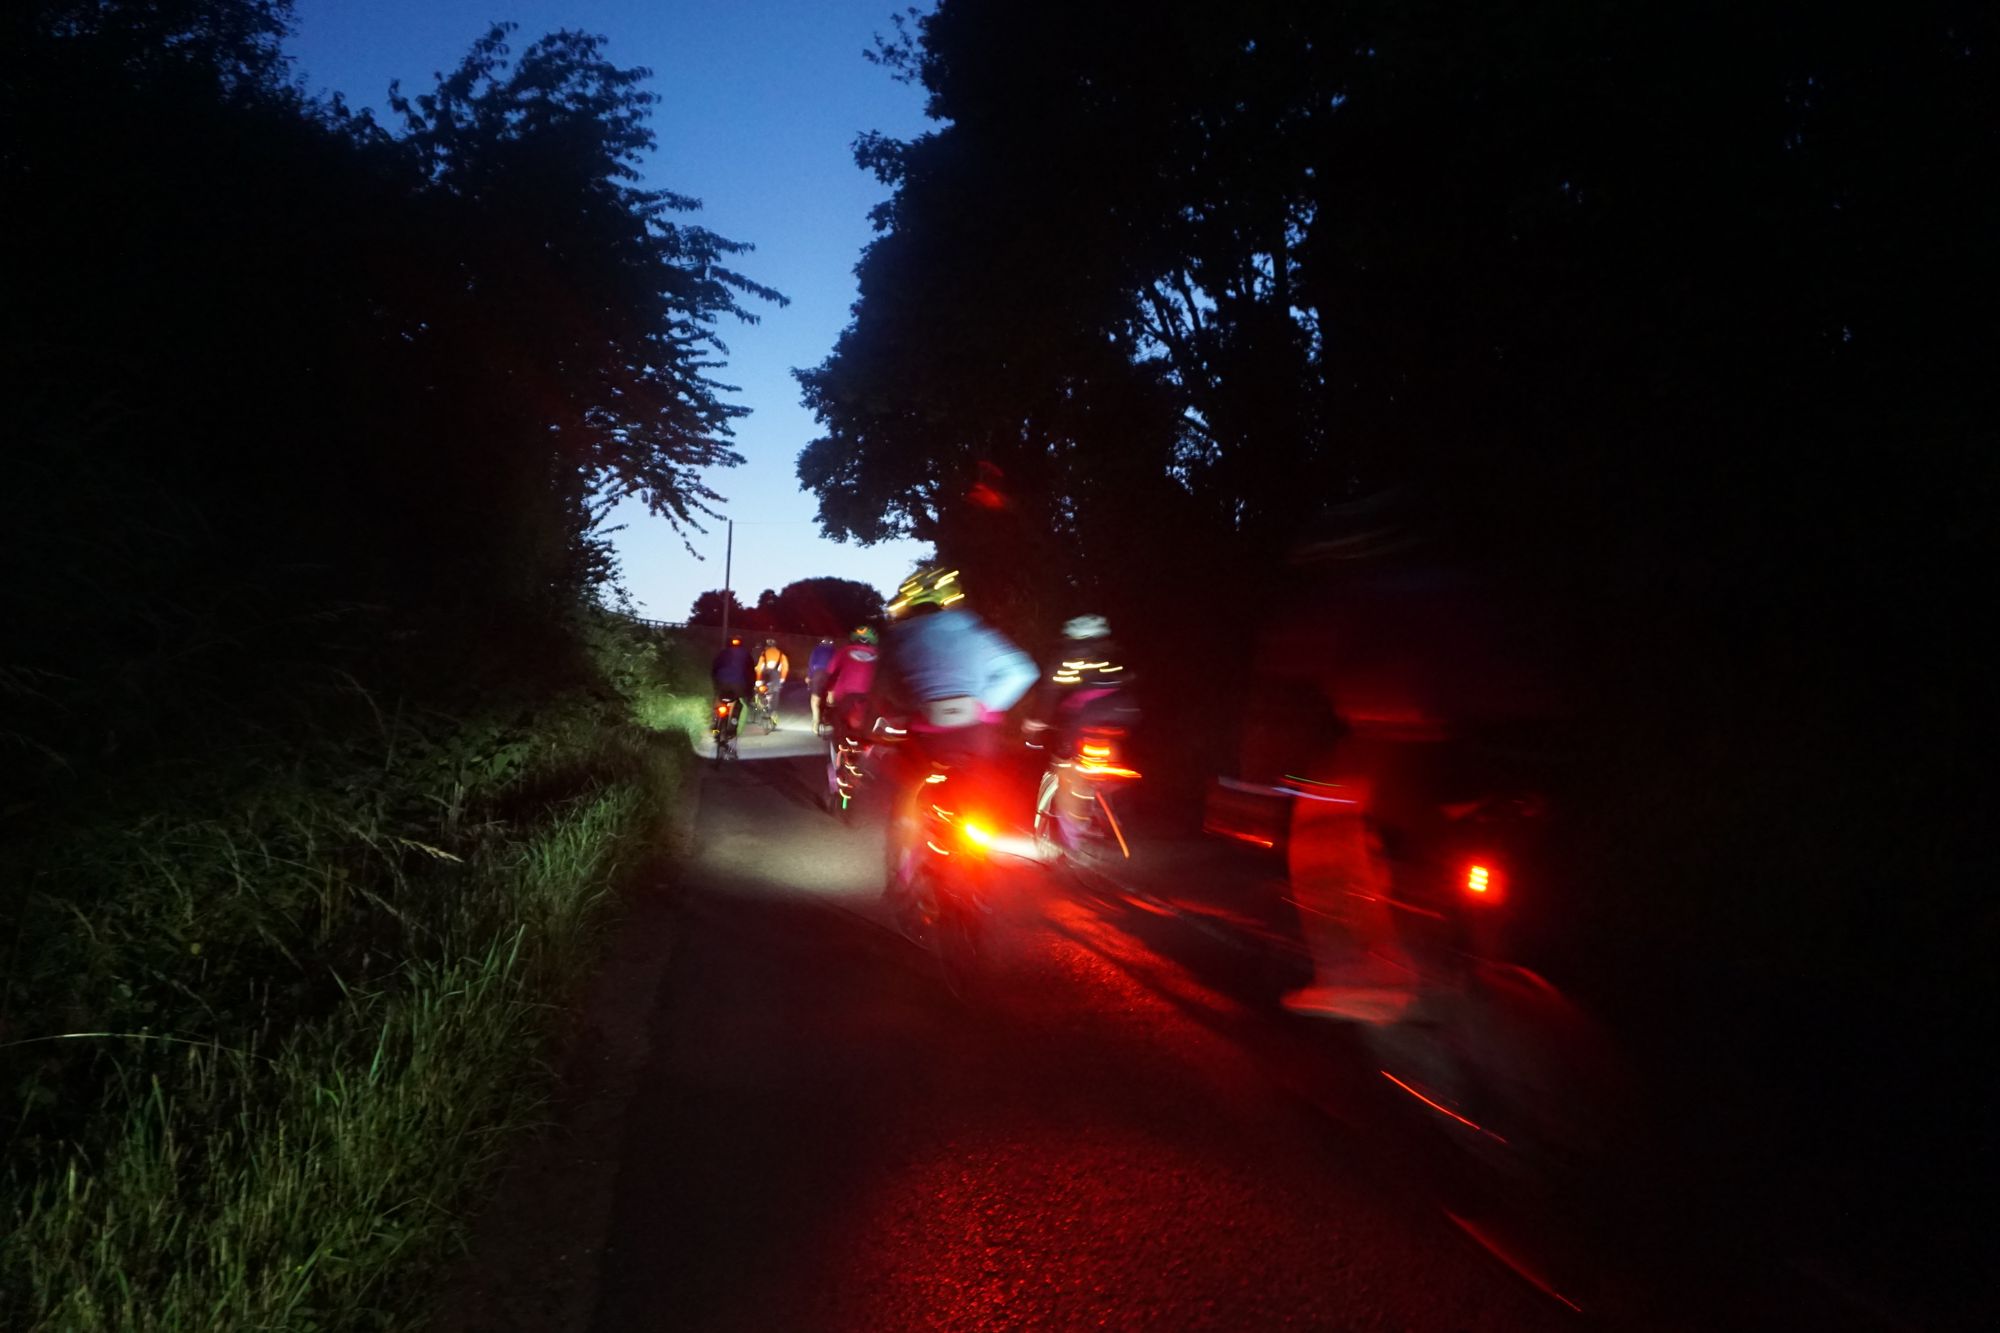 People cycling with glowing rear lights and front lights, and some people festooned in fairy lights, down an unlit country lane. In the distance, the pale blue of dawn rises beyond the road's edge.